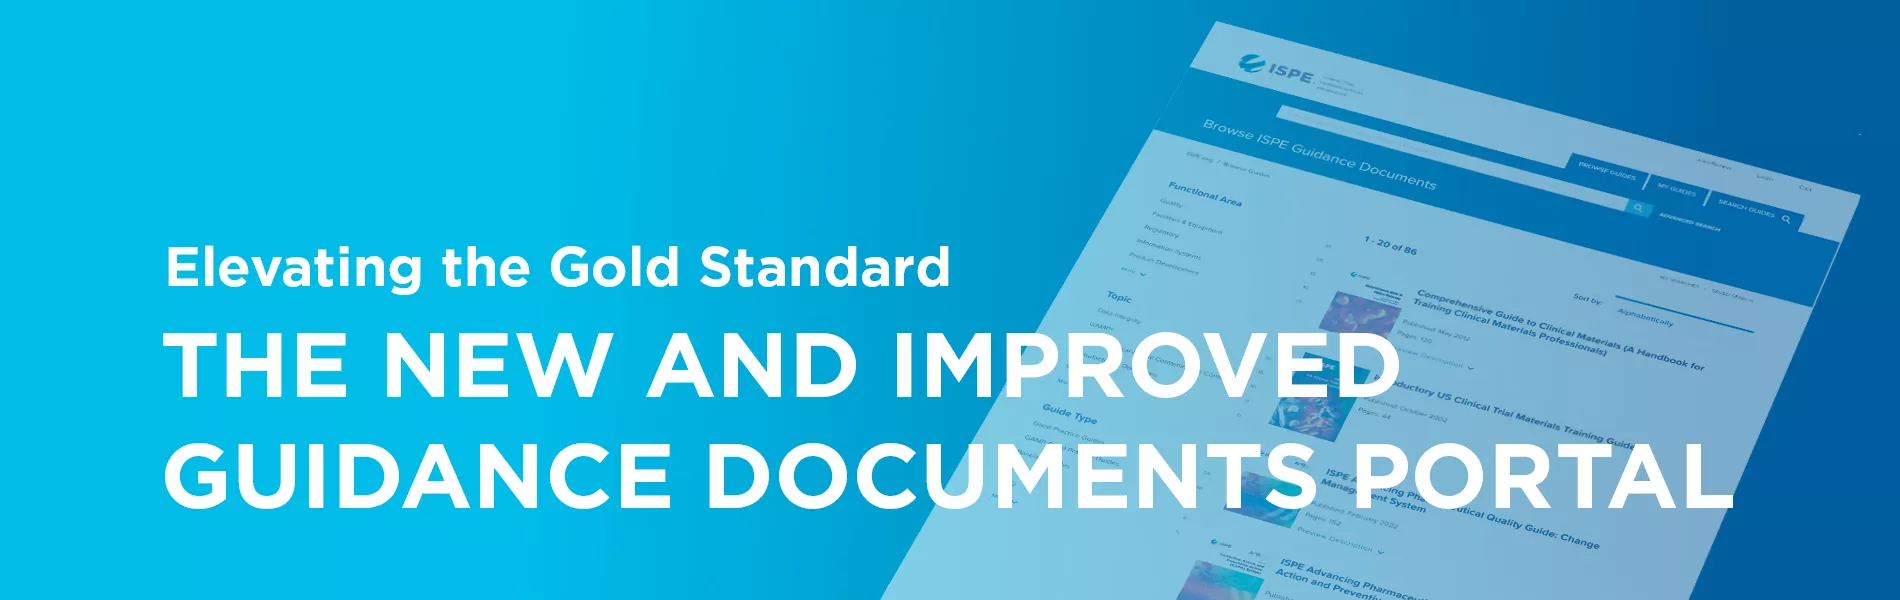 The New & Improved Guidance Documents Portal